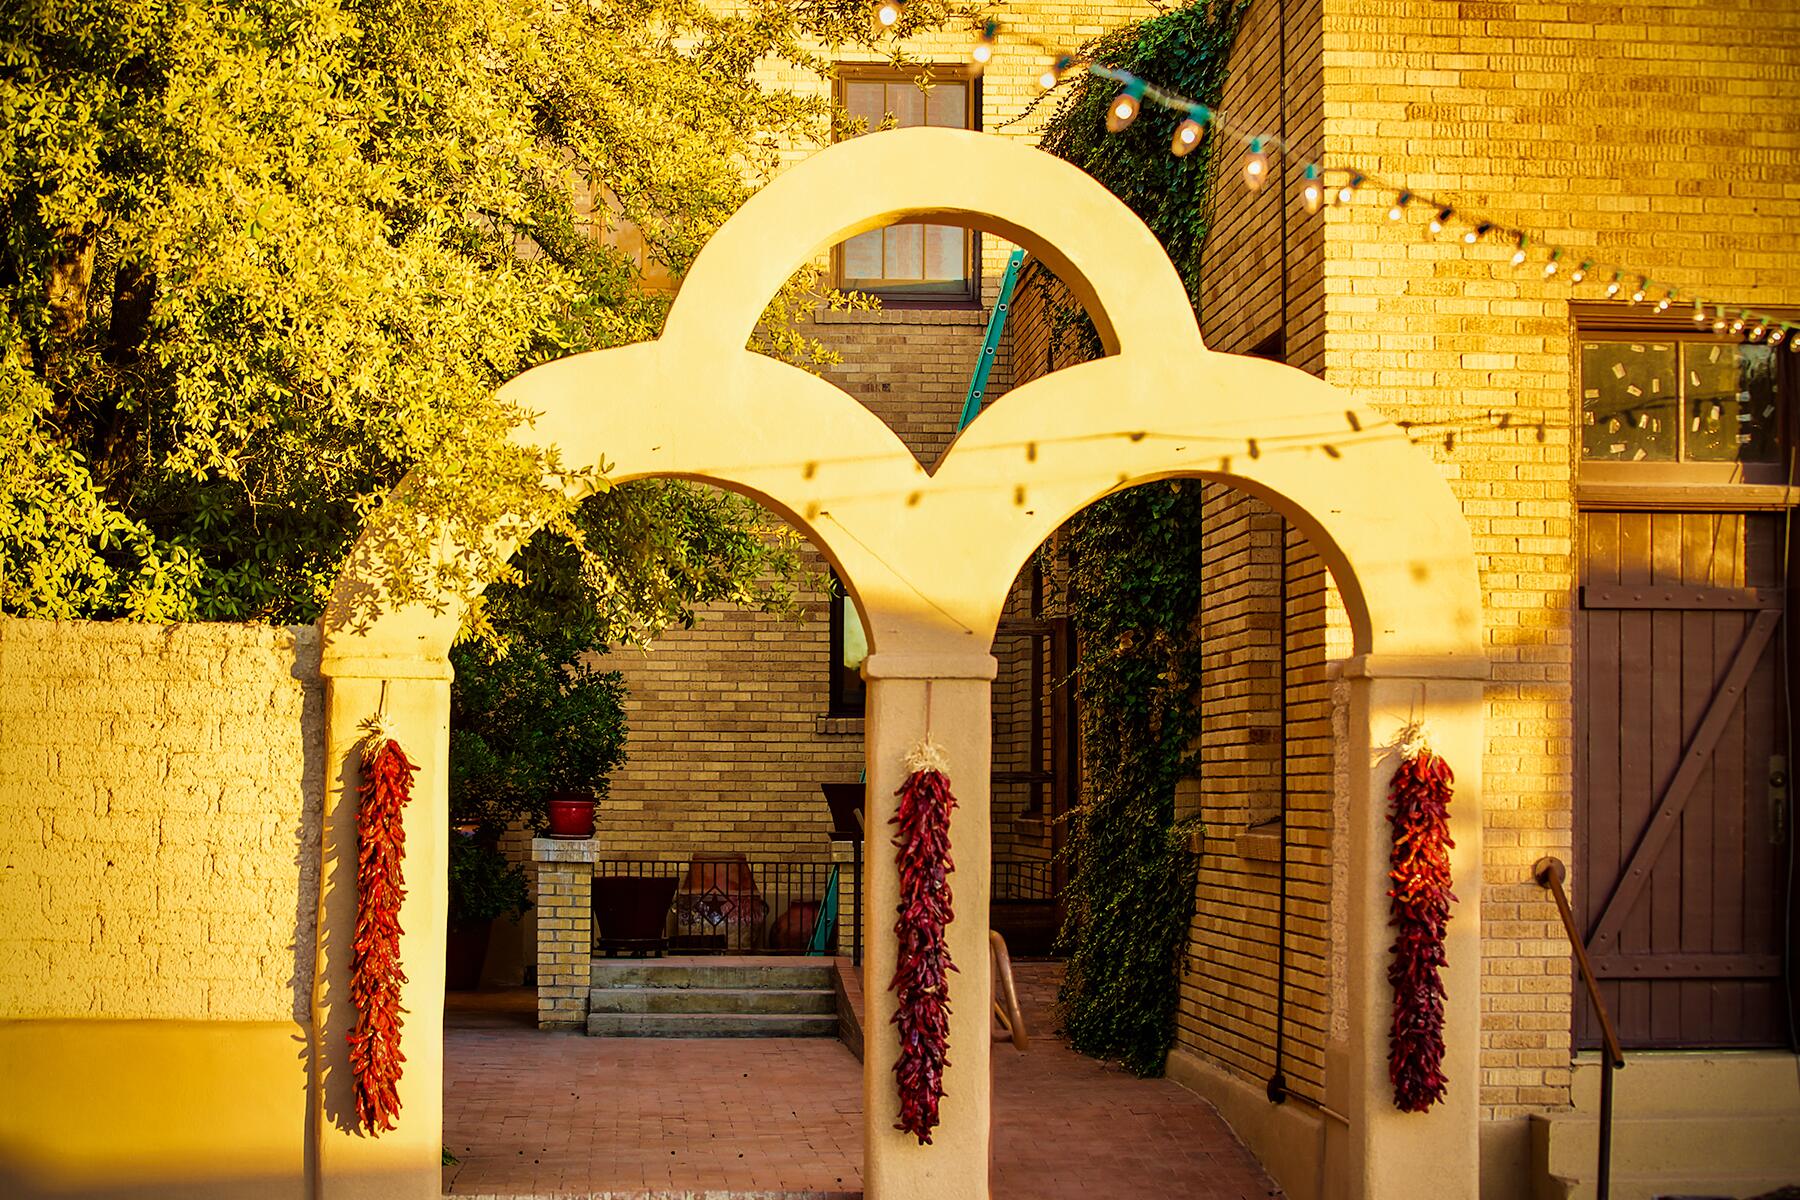 One of the archways at The Gage Hotel in Marathon_Texas_Michelle Gross